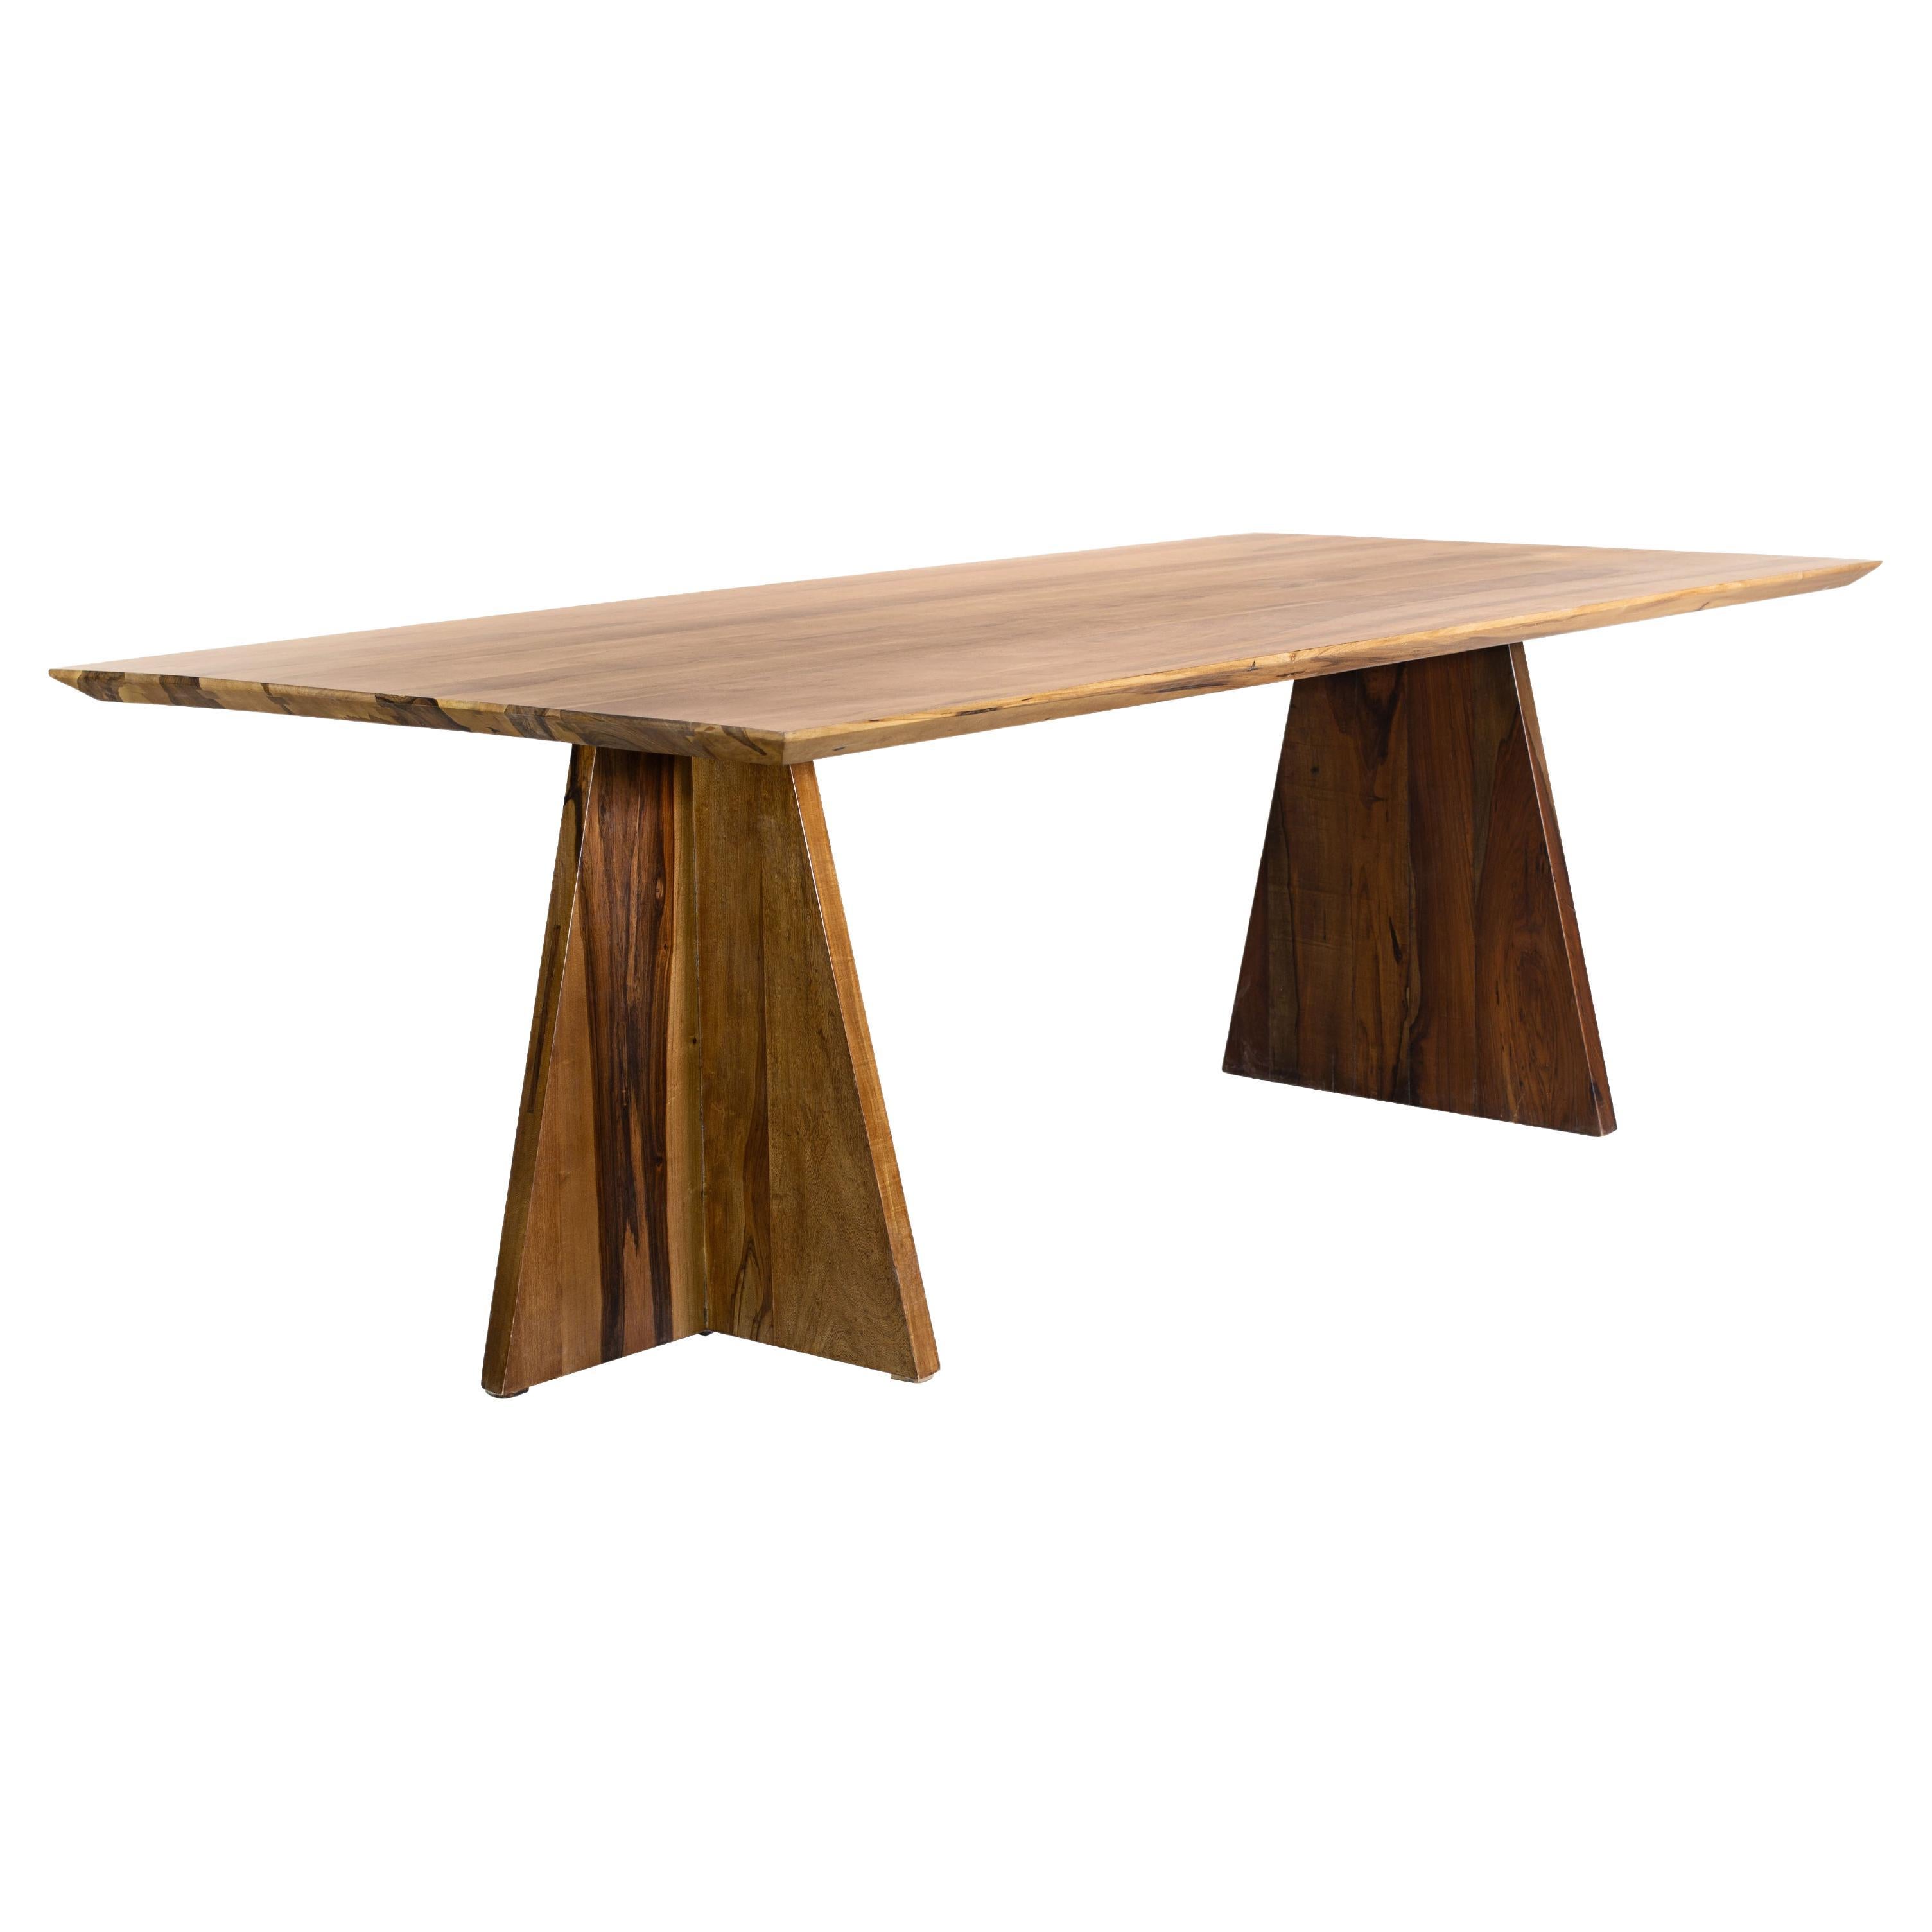 Solid Exotic Wood Twin Pedestal Dining Table / Desk Costantini, Luca In Stock For Sale